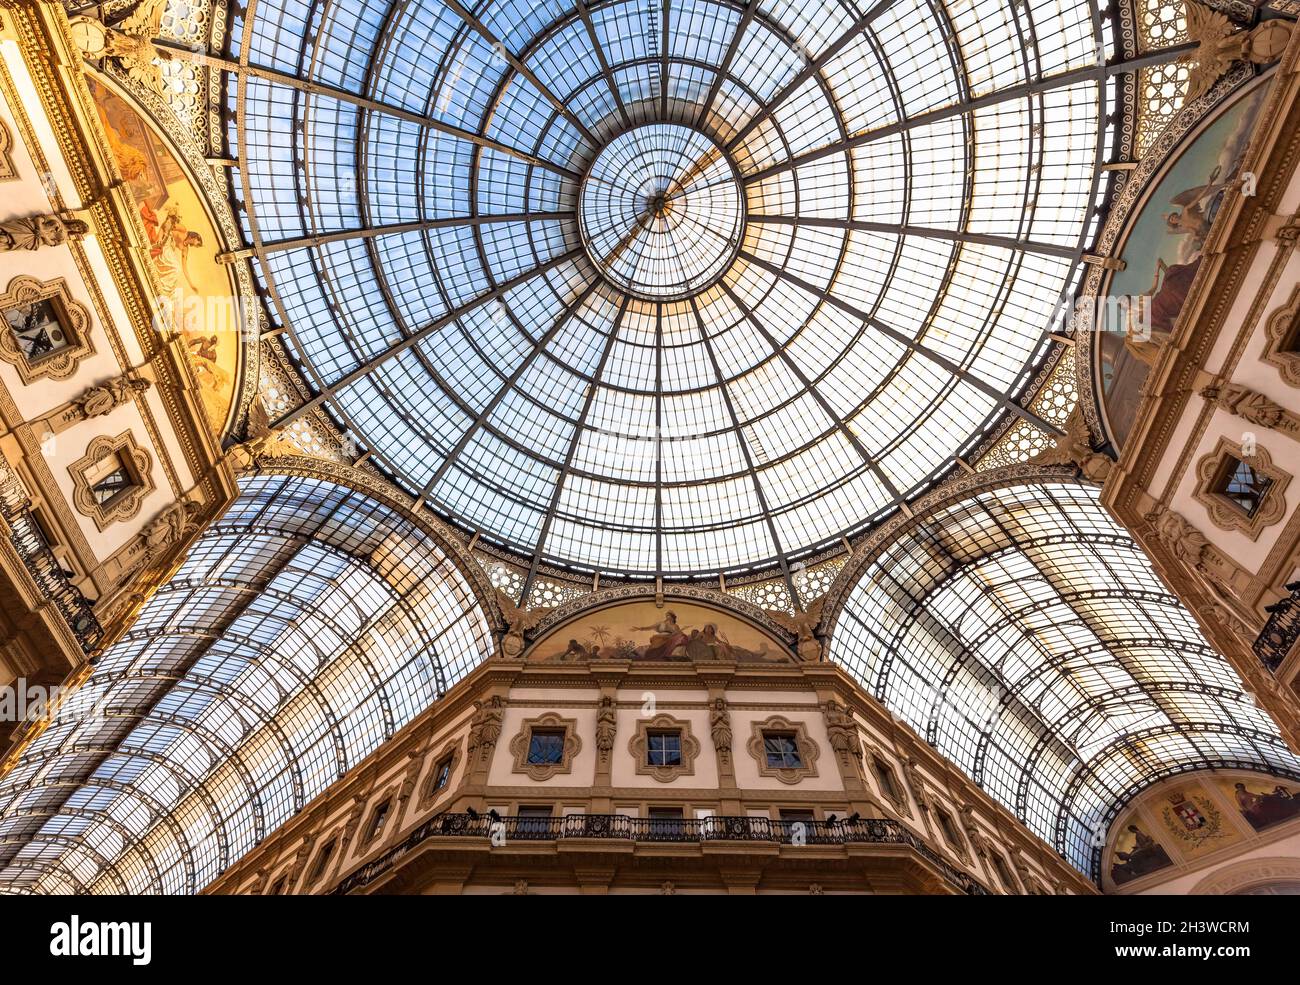 Architecture in Milan fashion Gallery, Italy. Dome roof architectural detail. Stock Photo